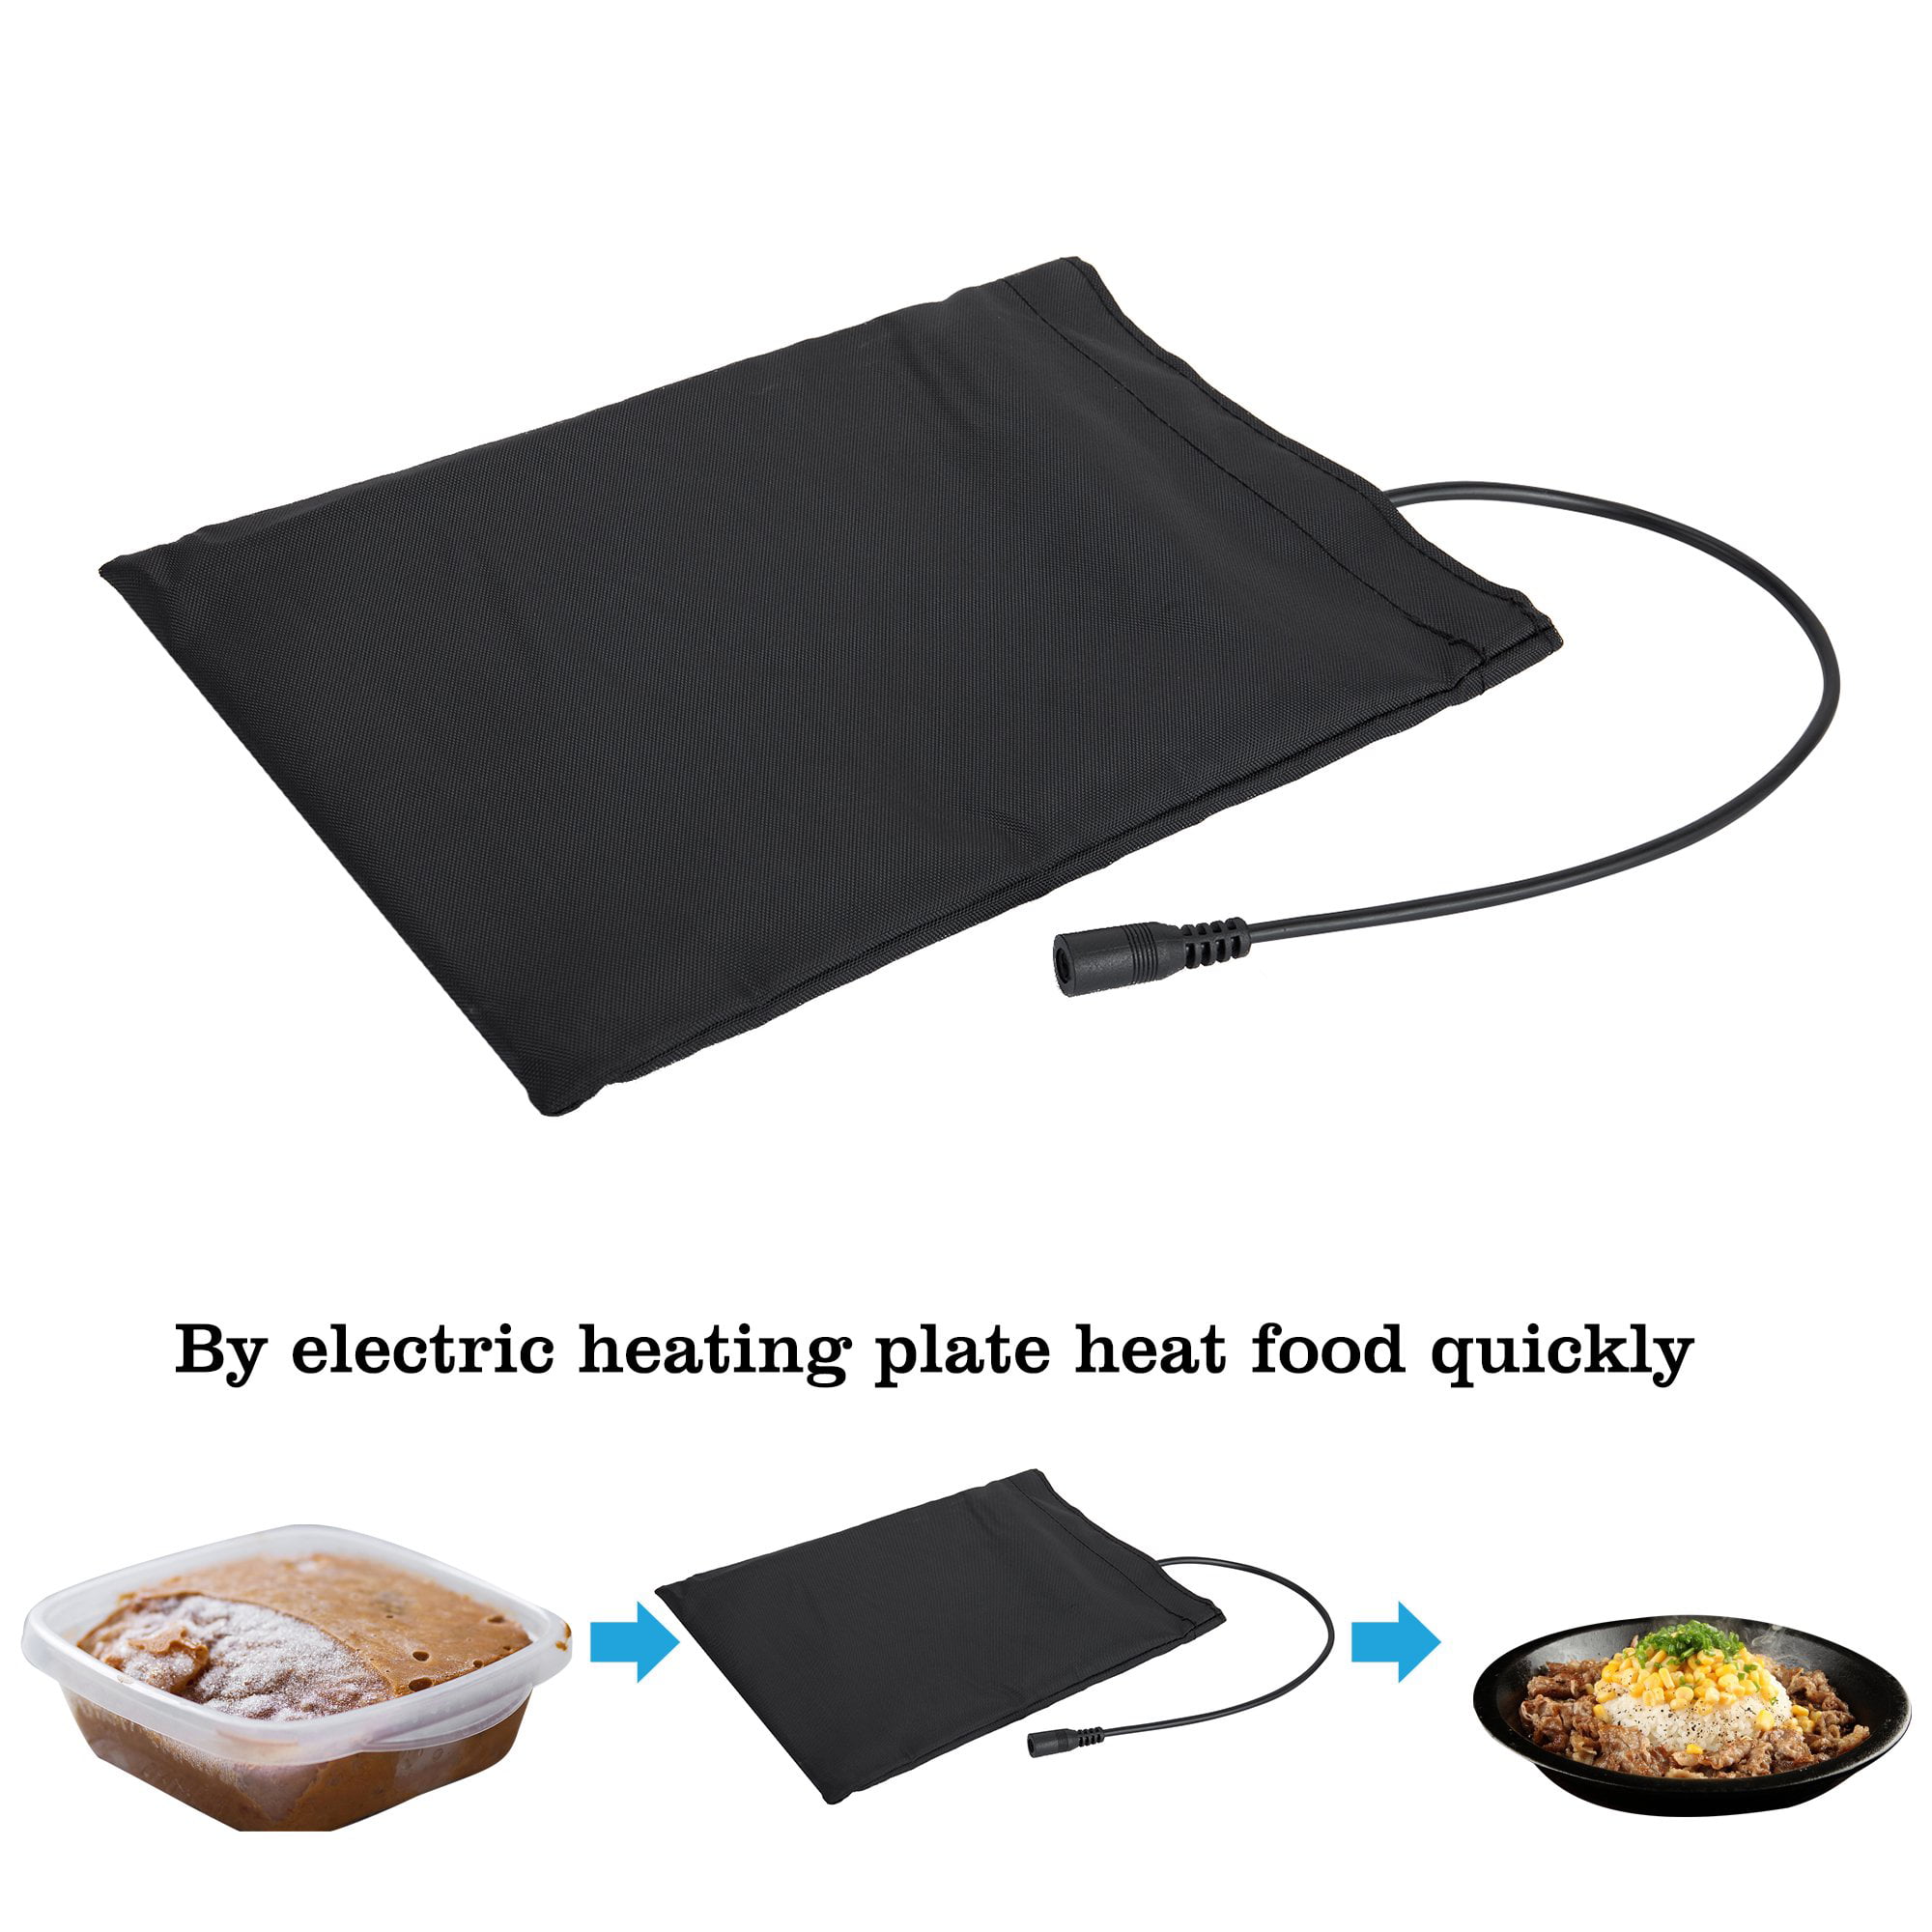 Car Food Warmer Portable 12V Personal Oven for Car Heat Lunch Box with  Adjustable/Detachable shoulder strap, Using for Work/Picnic/Road Trip,  Electric